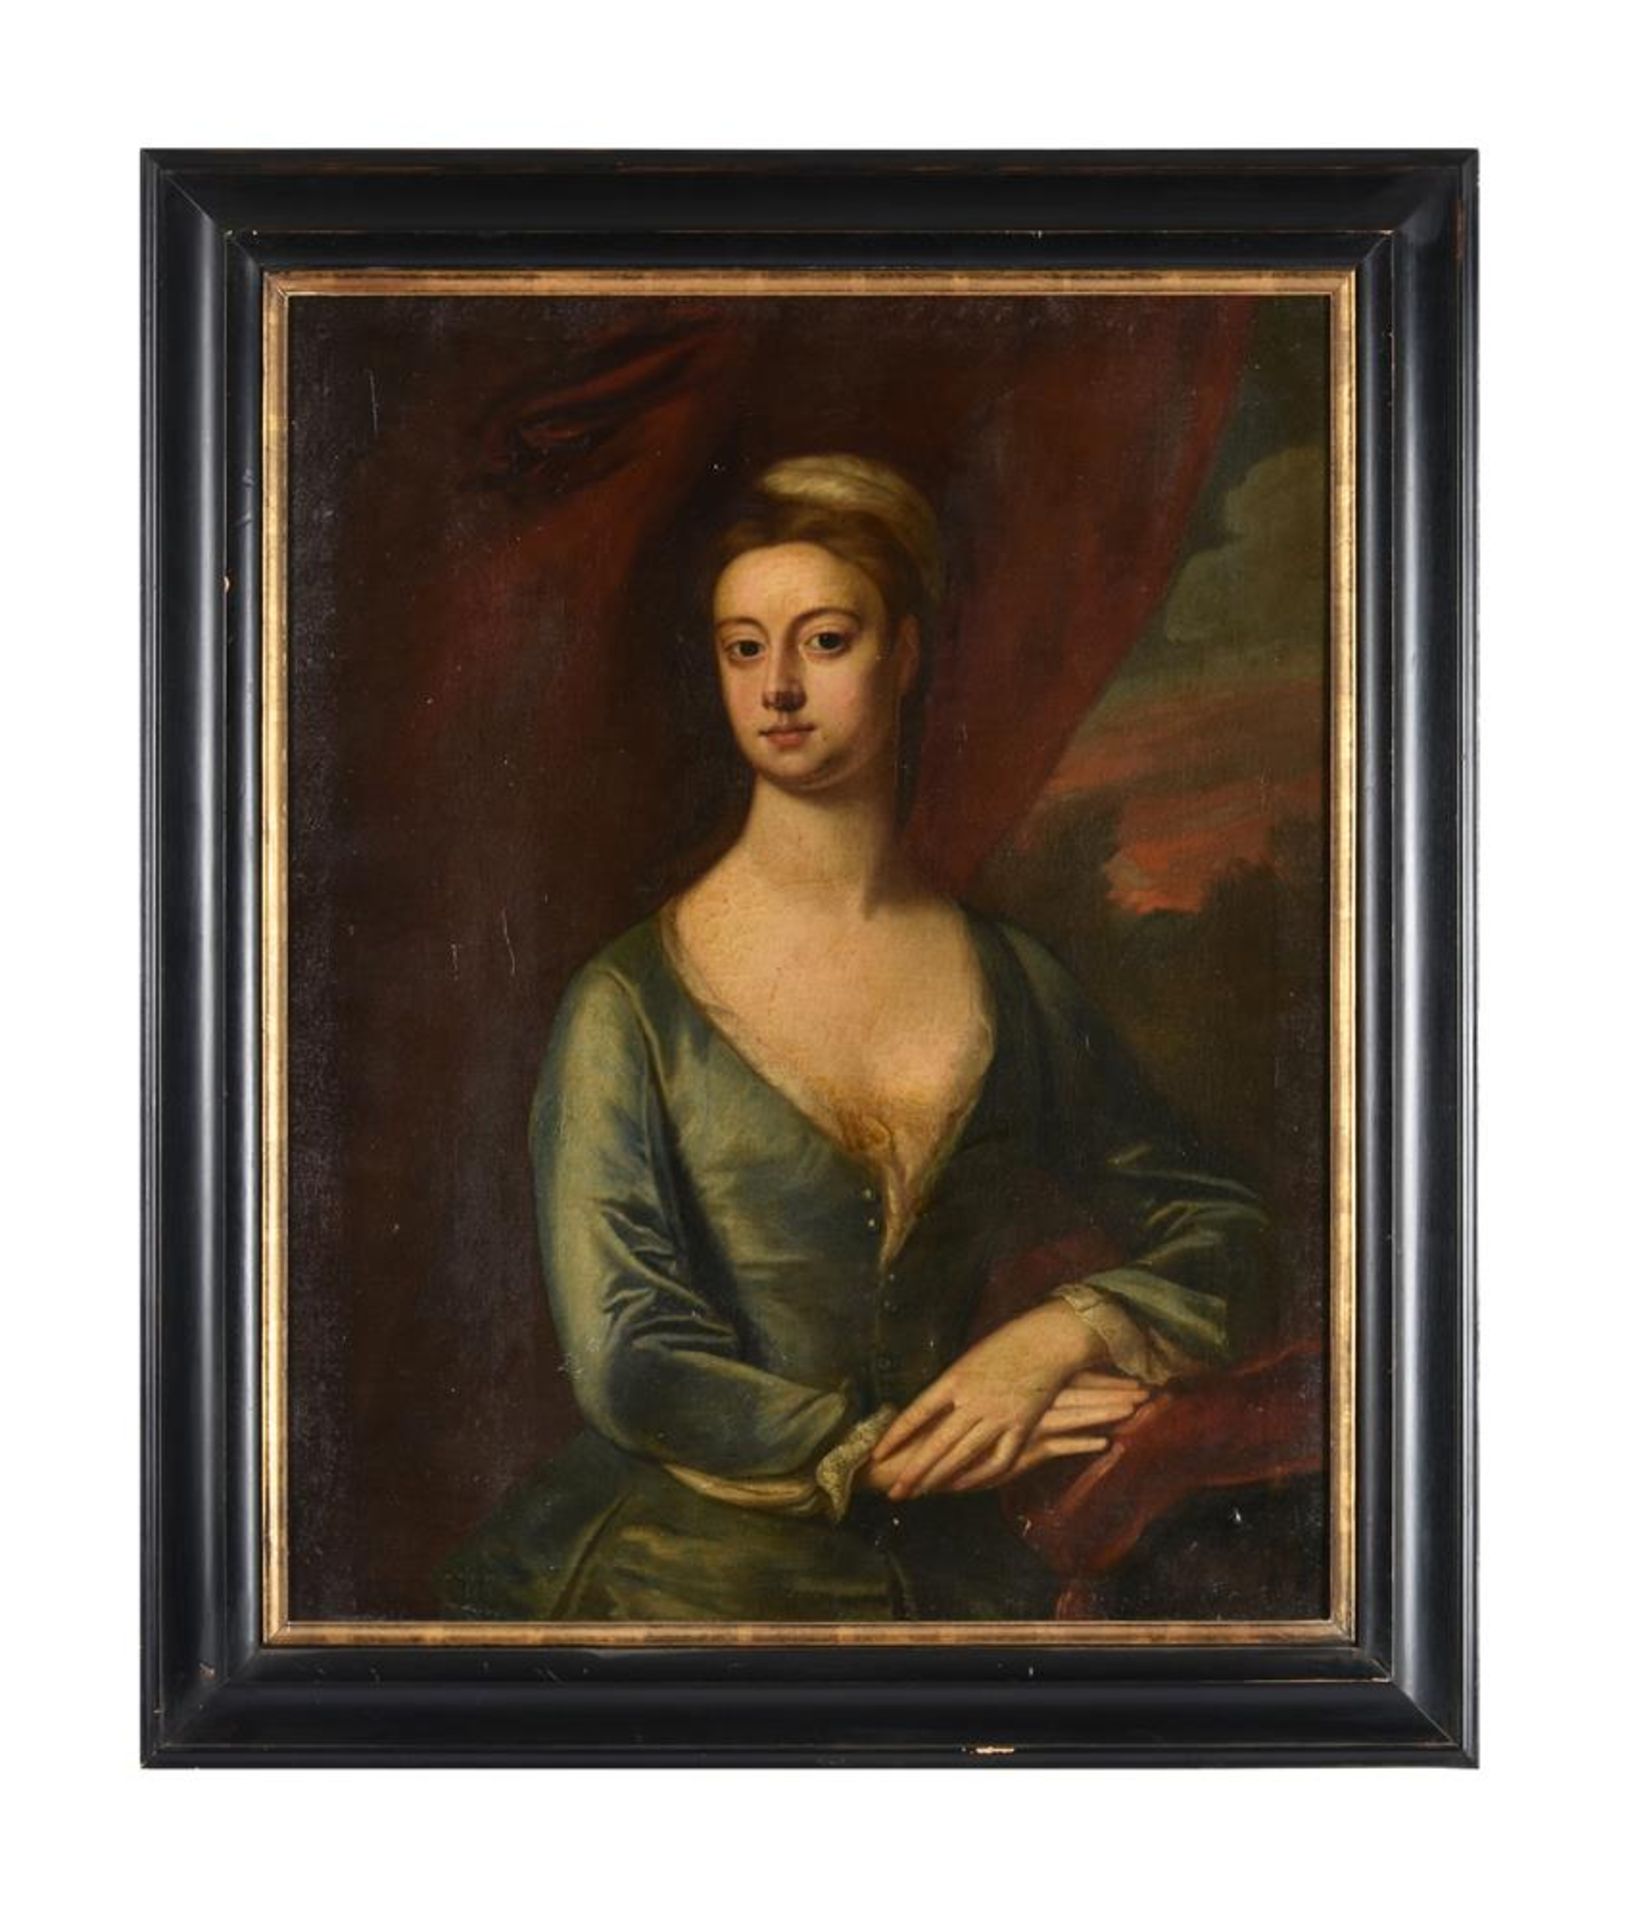 English School (18th century), Portrait of a lady in a blue satin dress - Image 2 of 3